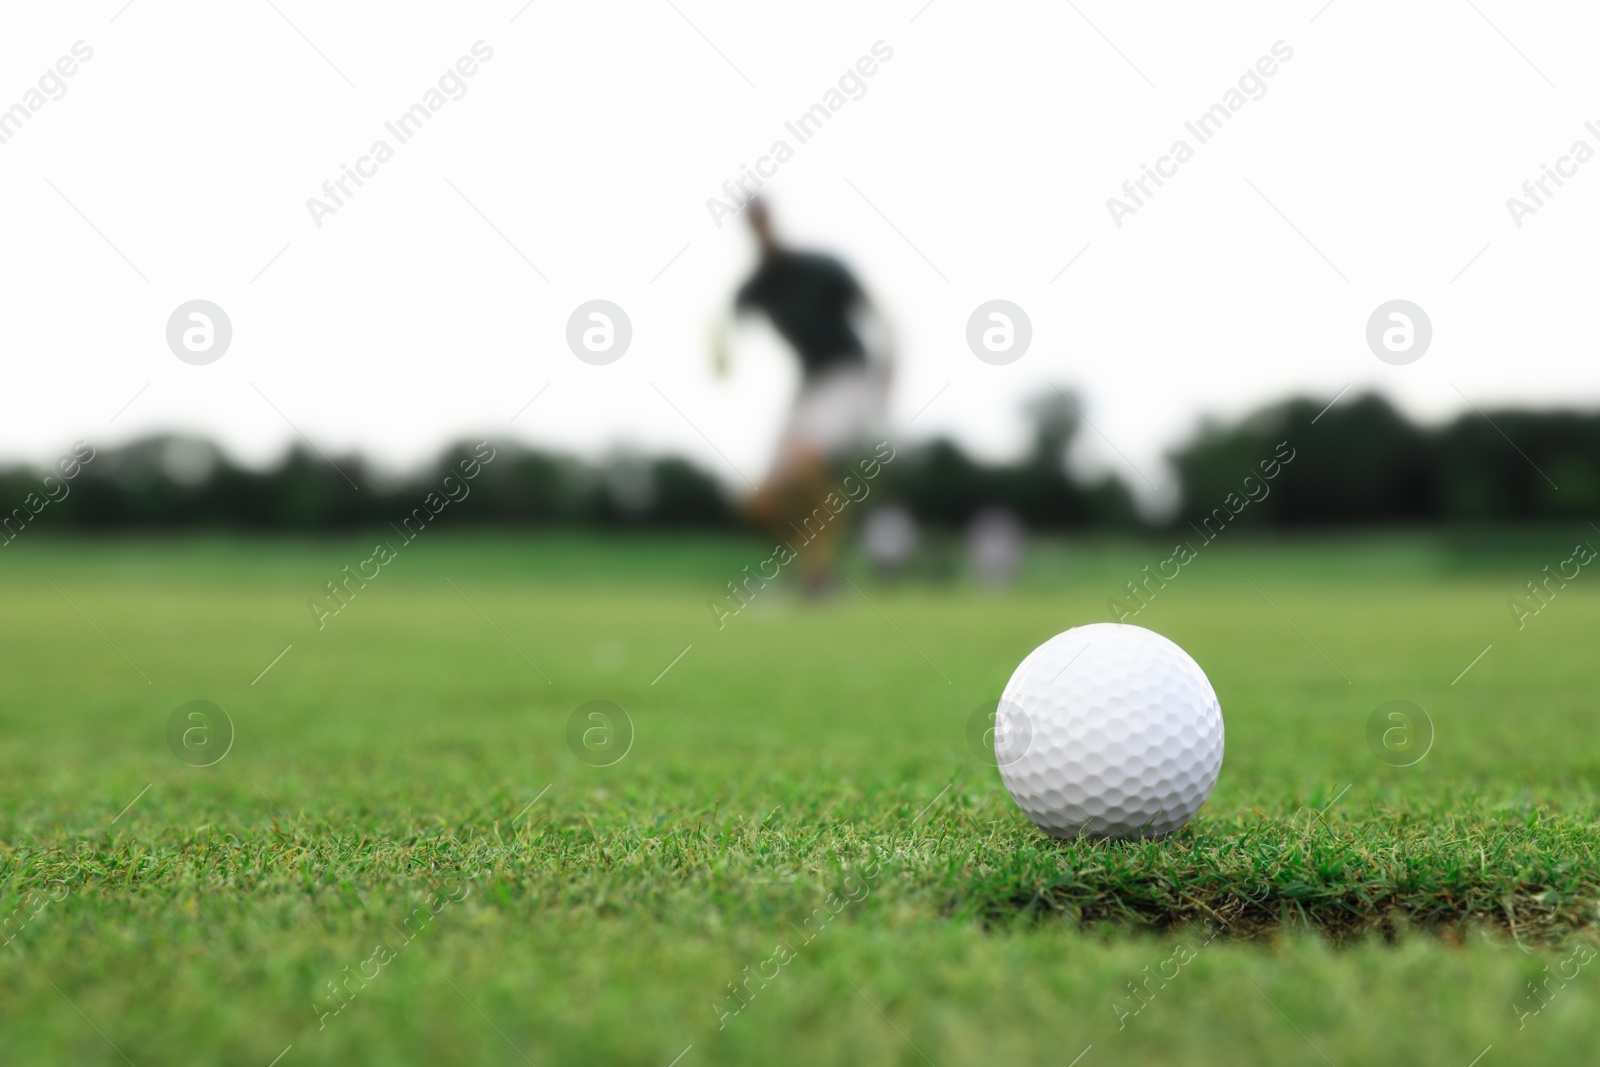 Photo of Man playing golf on green course, ball in focus. Sport and leisure